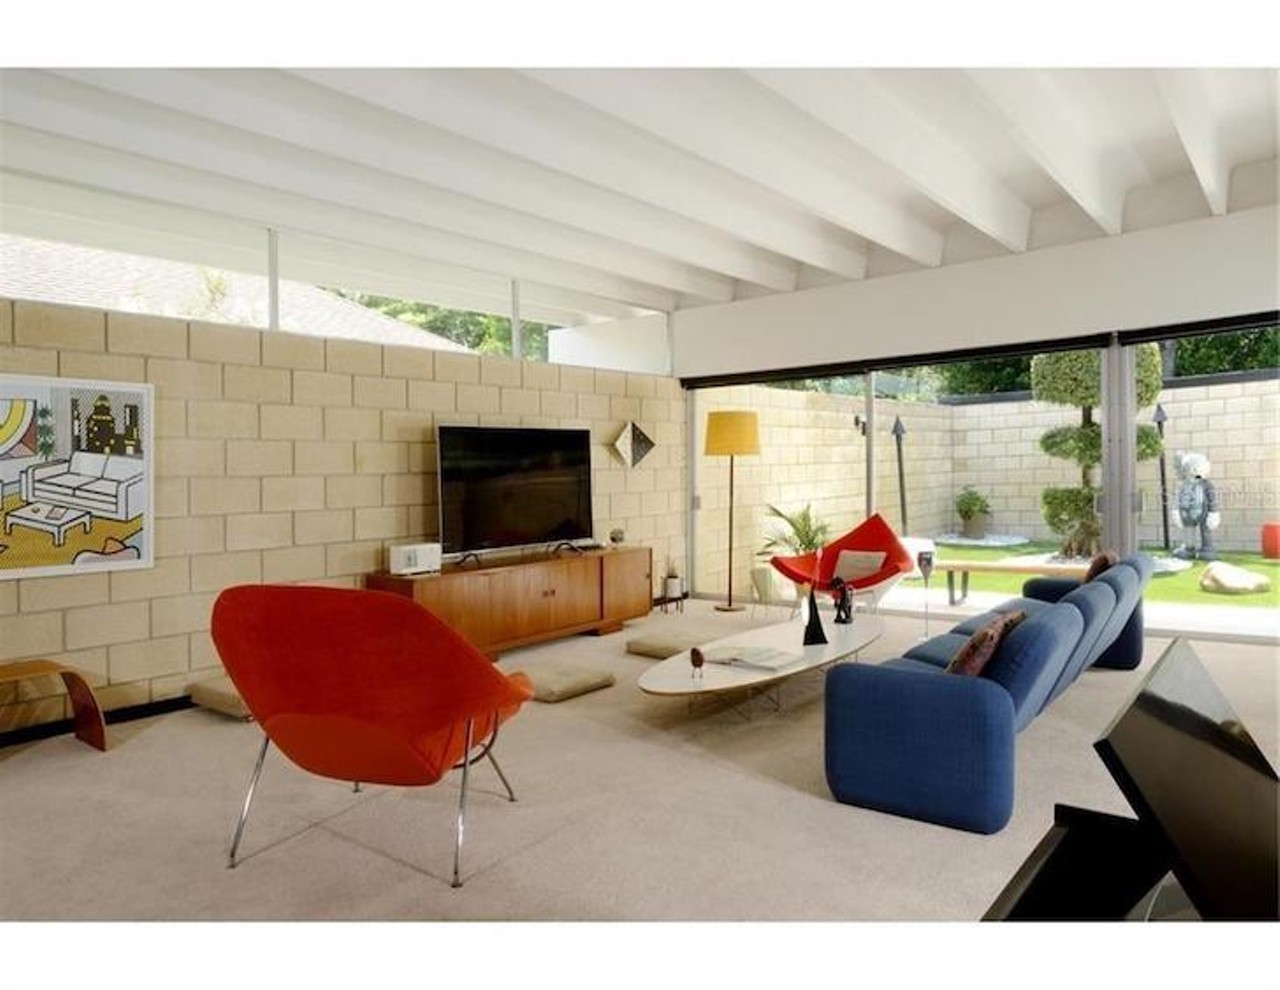 A Florida midcentury-modern gem by famed architect Gene Leedy is now for sale, and so is all the furniture